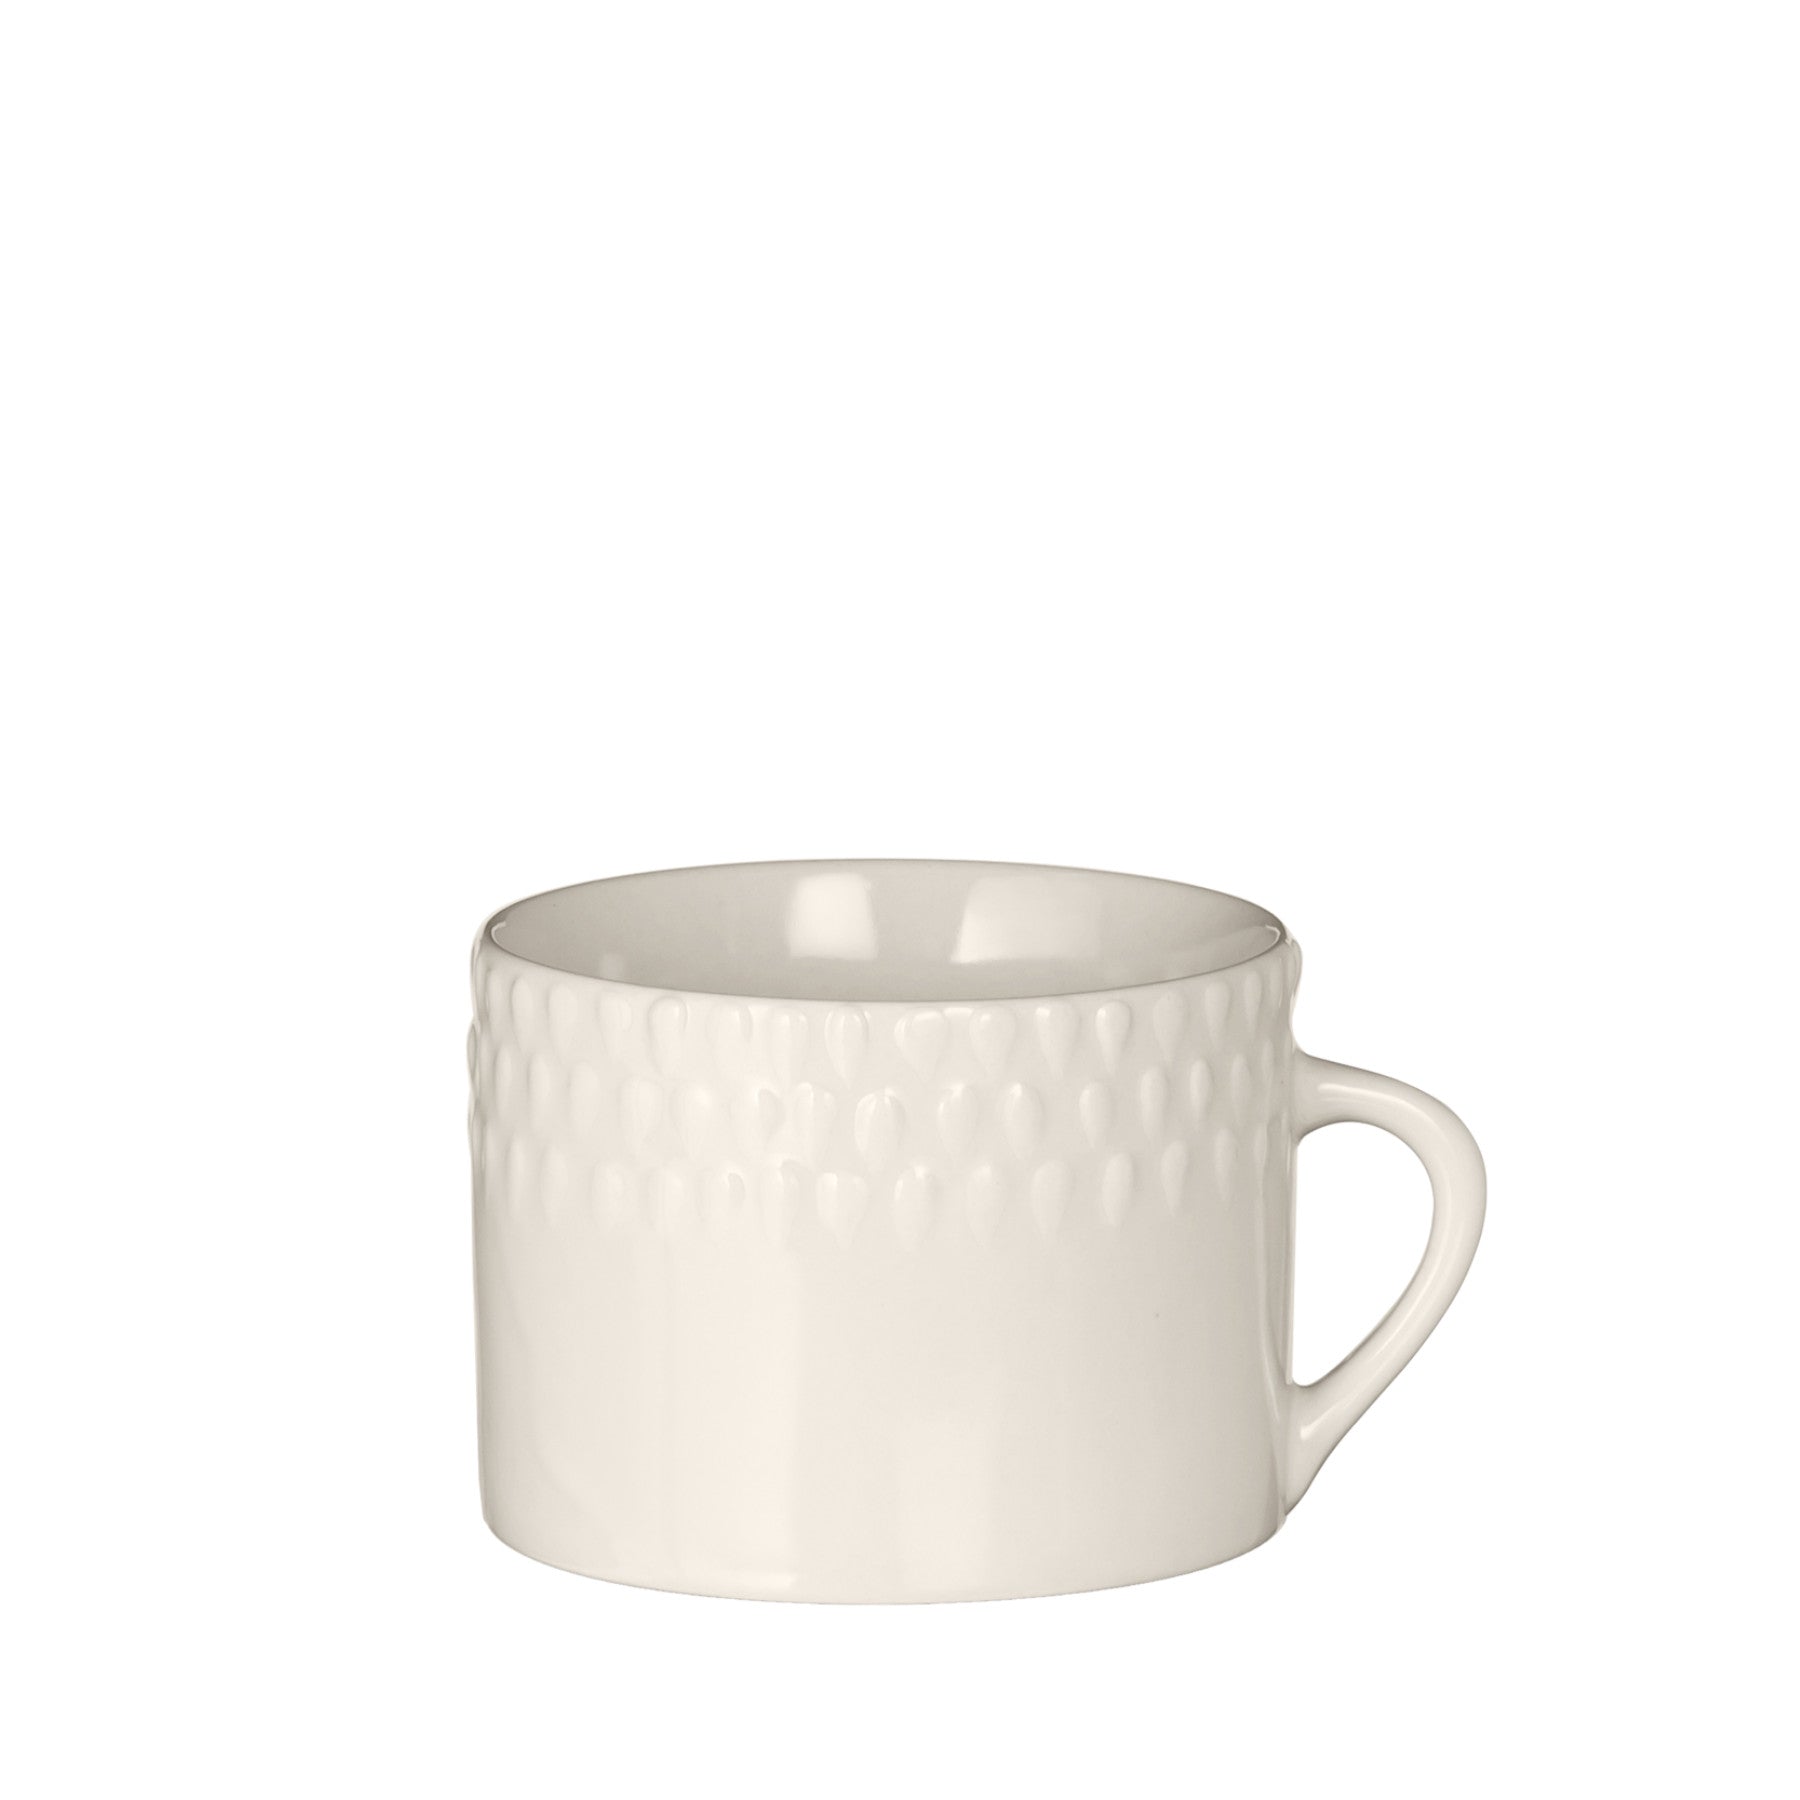 White ceramic coffee mug with textured design isolated on a white background